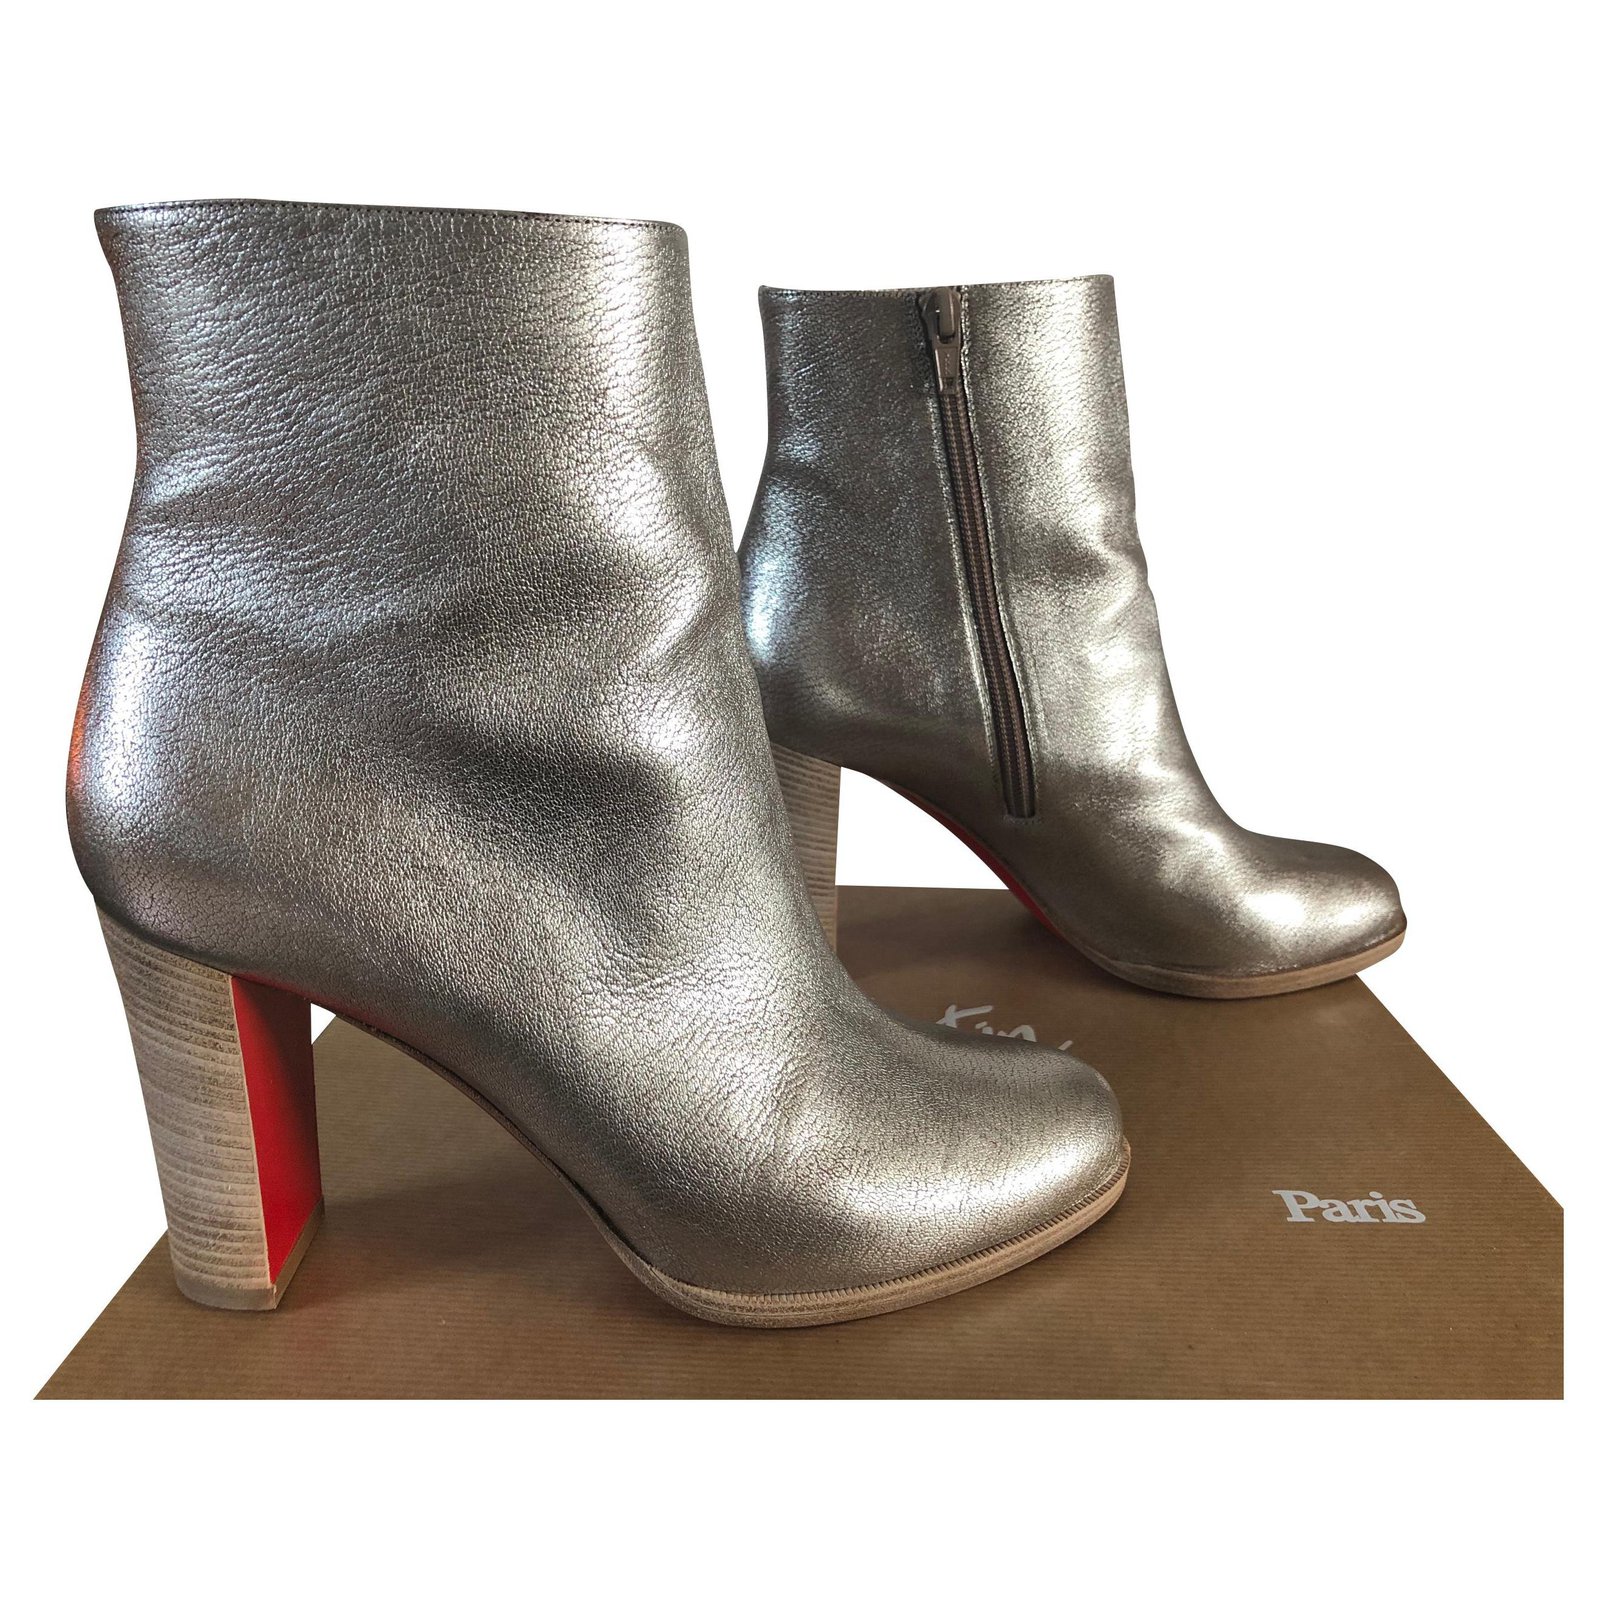 Christian Louboutin Adox 85 Ankle Boots 